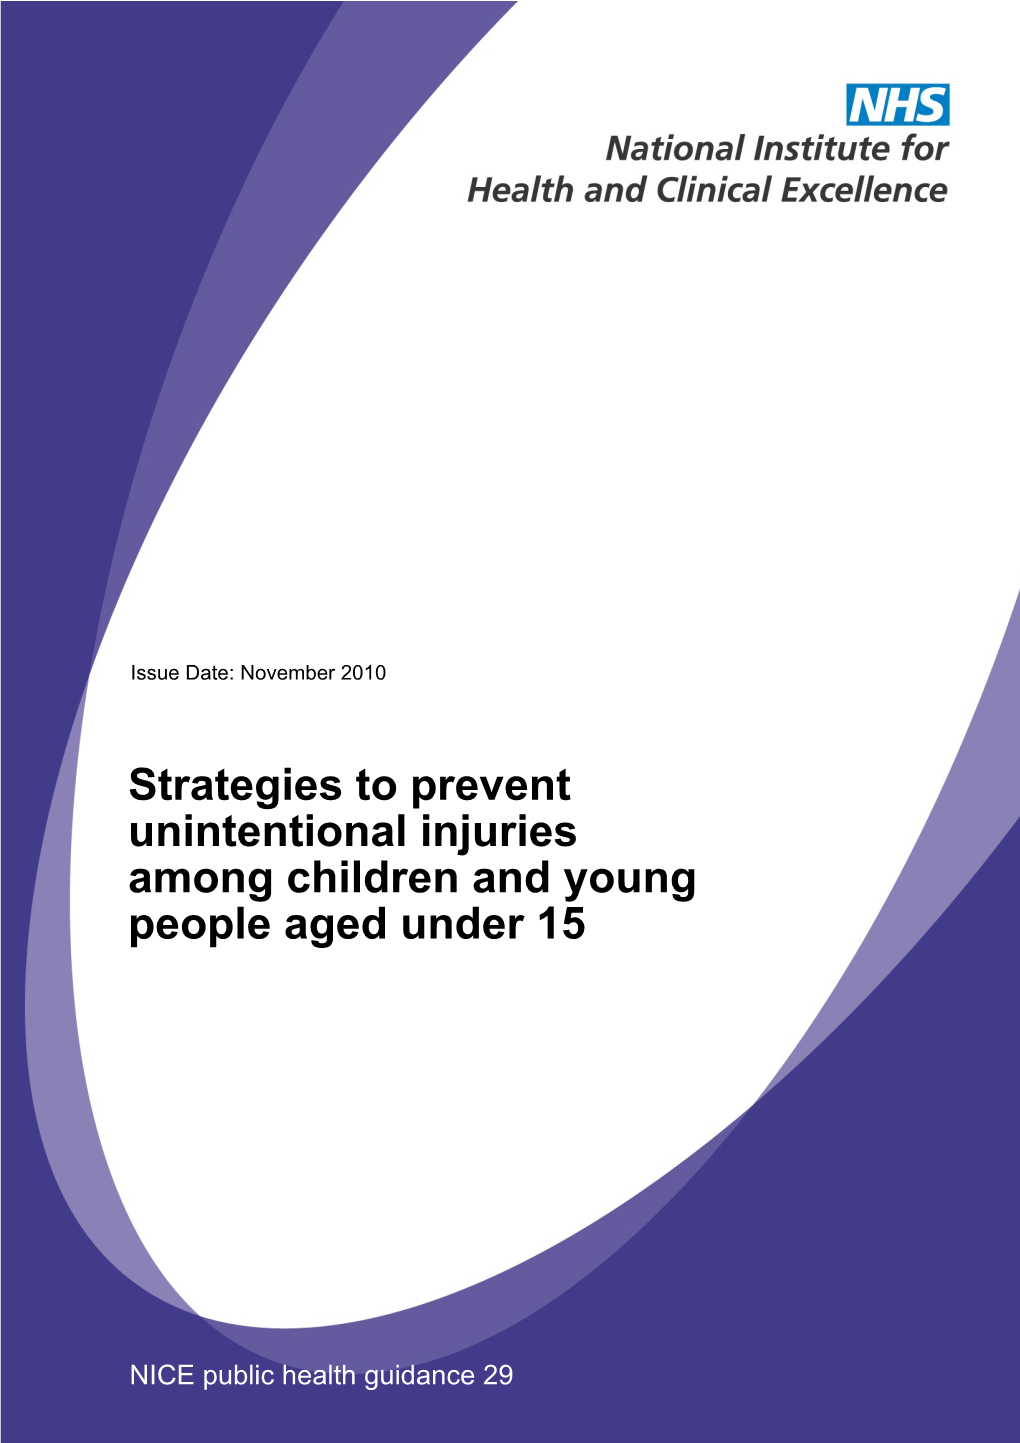 NICE Public Health Guidance 29: Strategies to Prevent Unintentional Injuries Among Under-15S